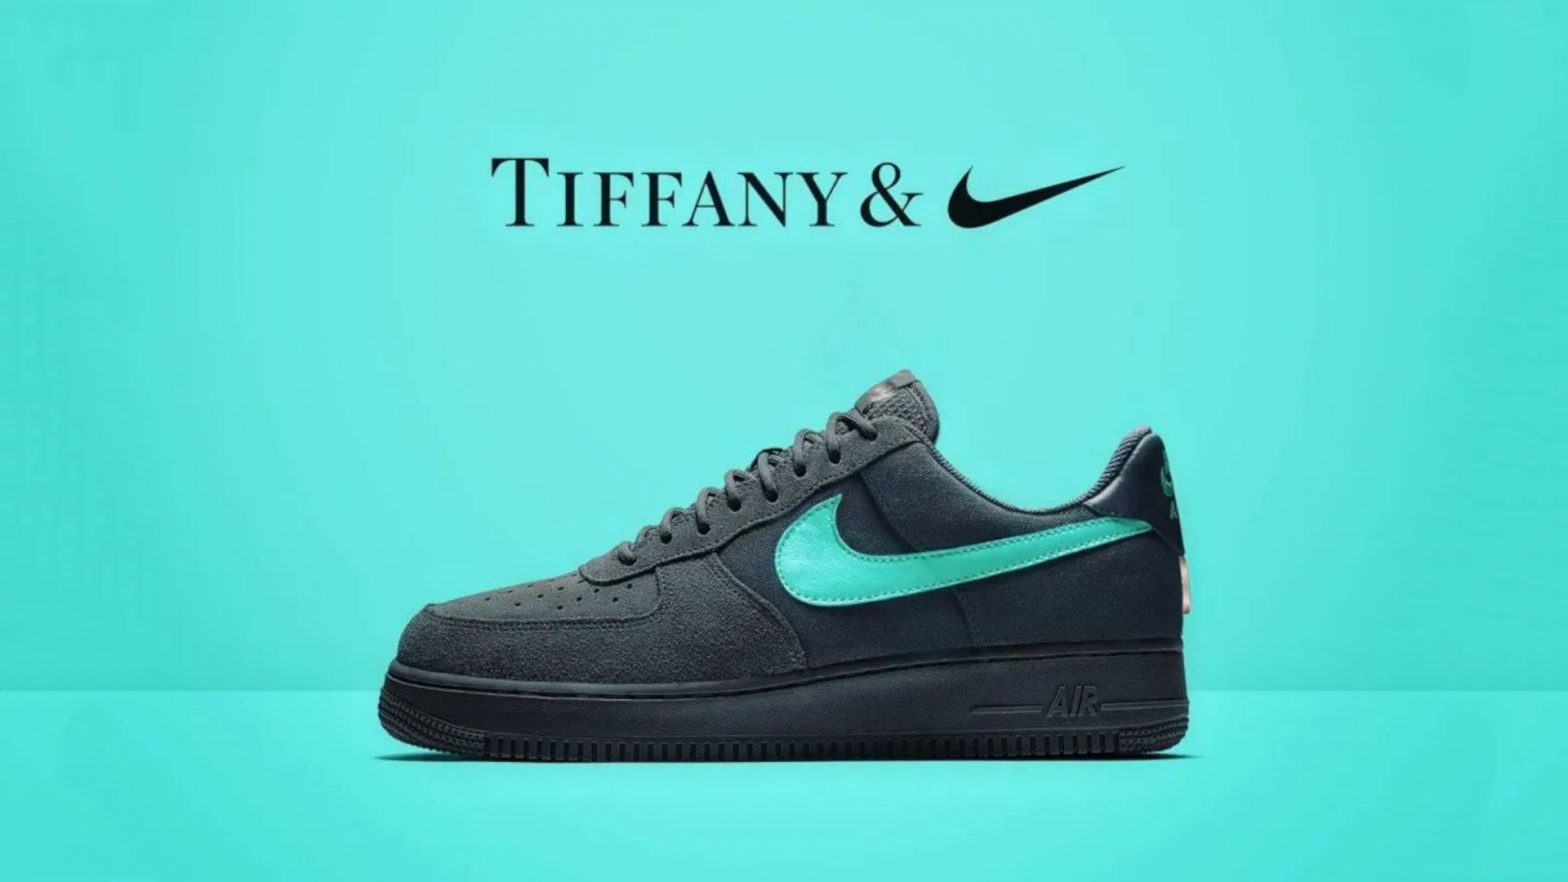 Could This Be The First Look At The Nike x Tiffany & Co Collaboration?